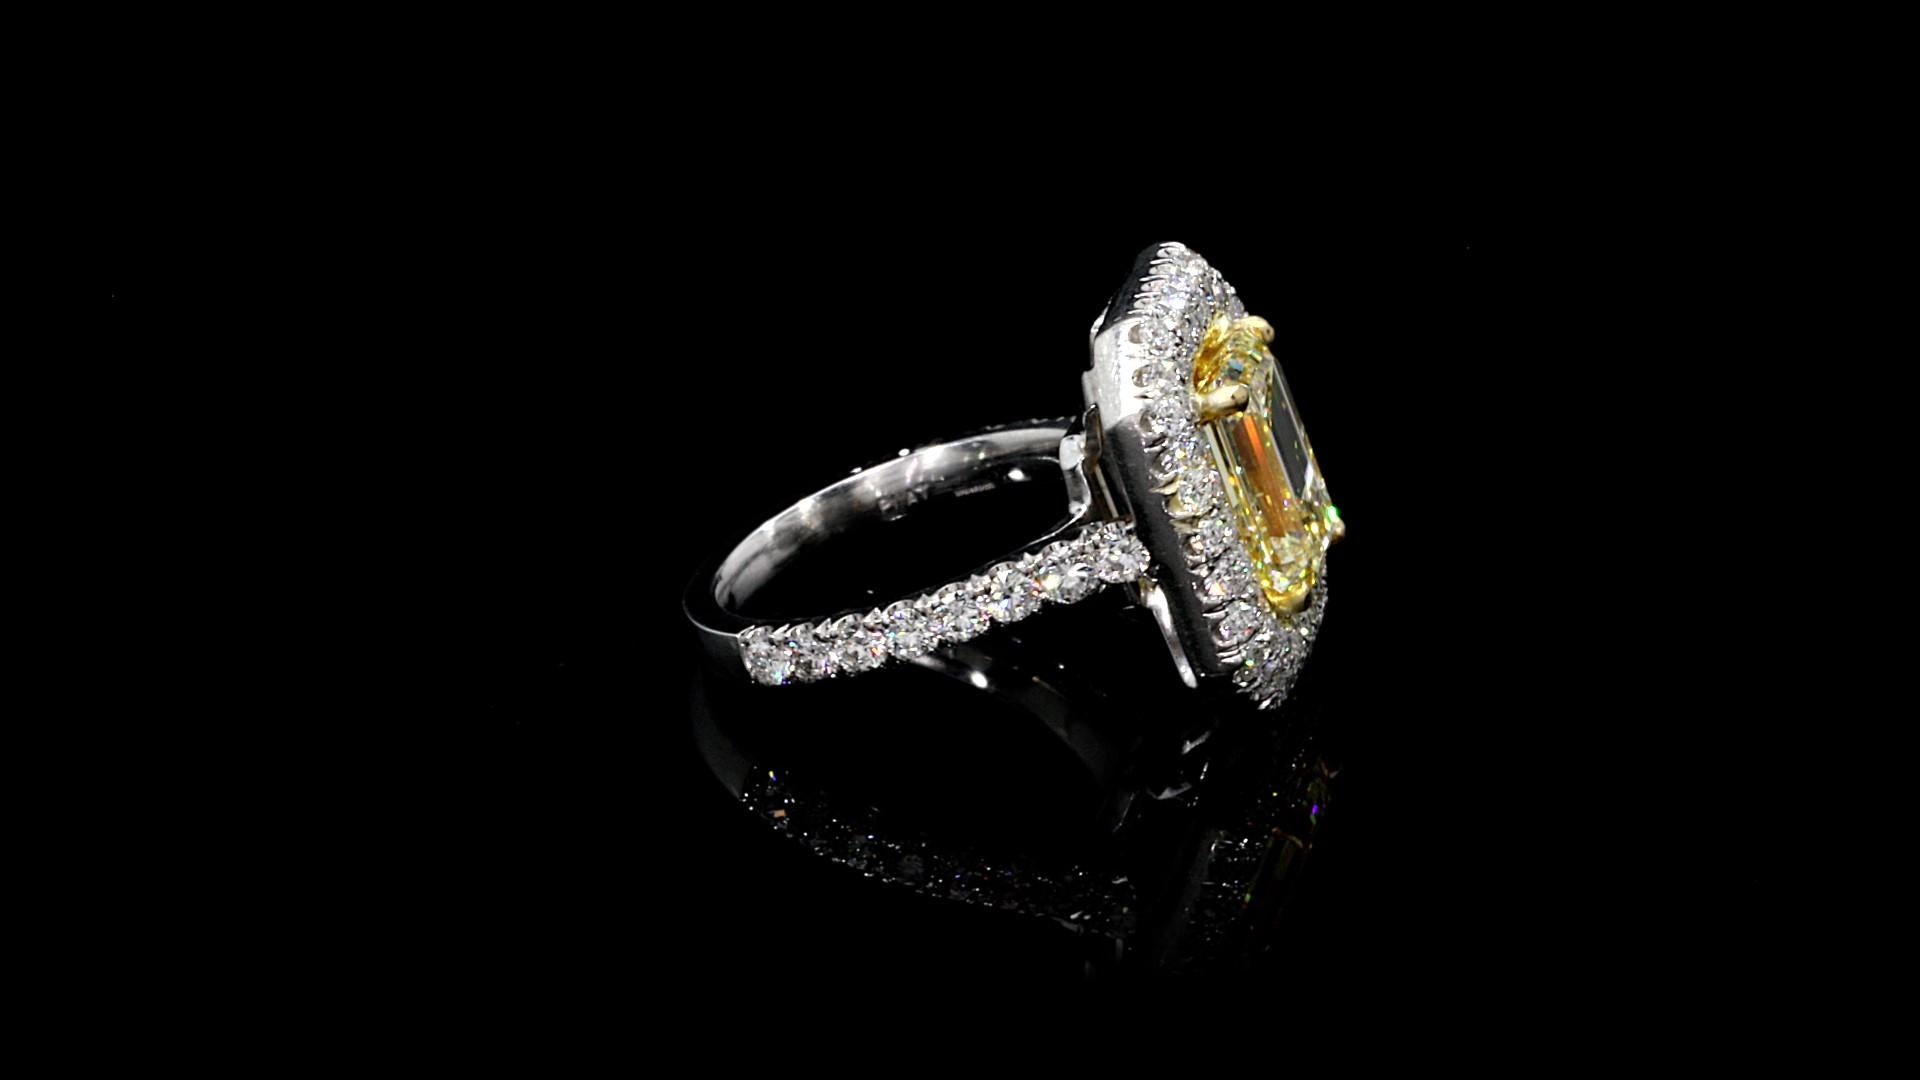 Emerald Cut Yellow Diamond Ring 6.12 carat Platinum/18KYG

Spectacular. Set in Platinum/18KYG

Stunning! Looks like nice FANCY YELLOW.

Emerald Cut weighs 4.01 carats

W-X  Color VVS1 Clarity GIA

Small Round Diamond weighs 2.11 carats

E/F Color VS